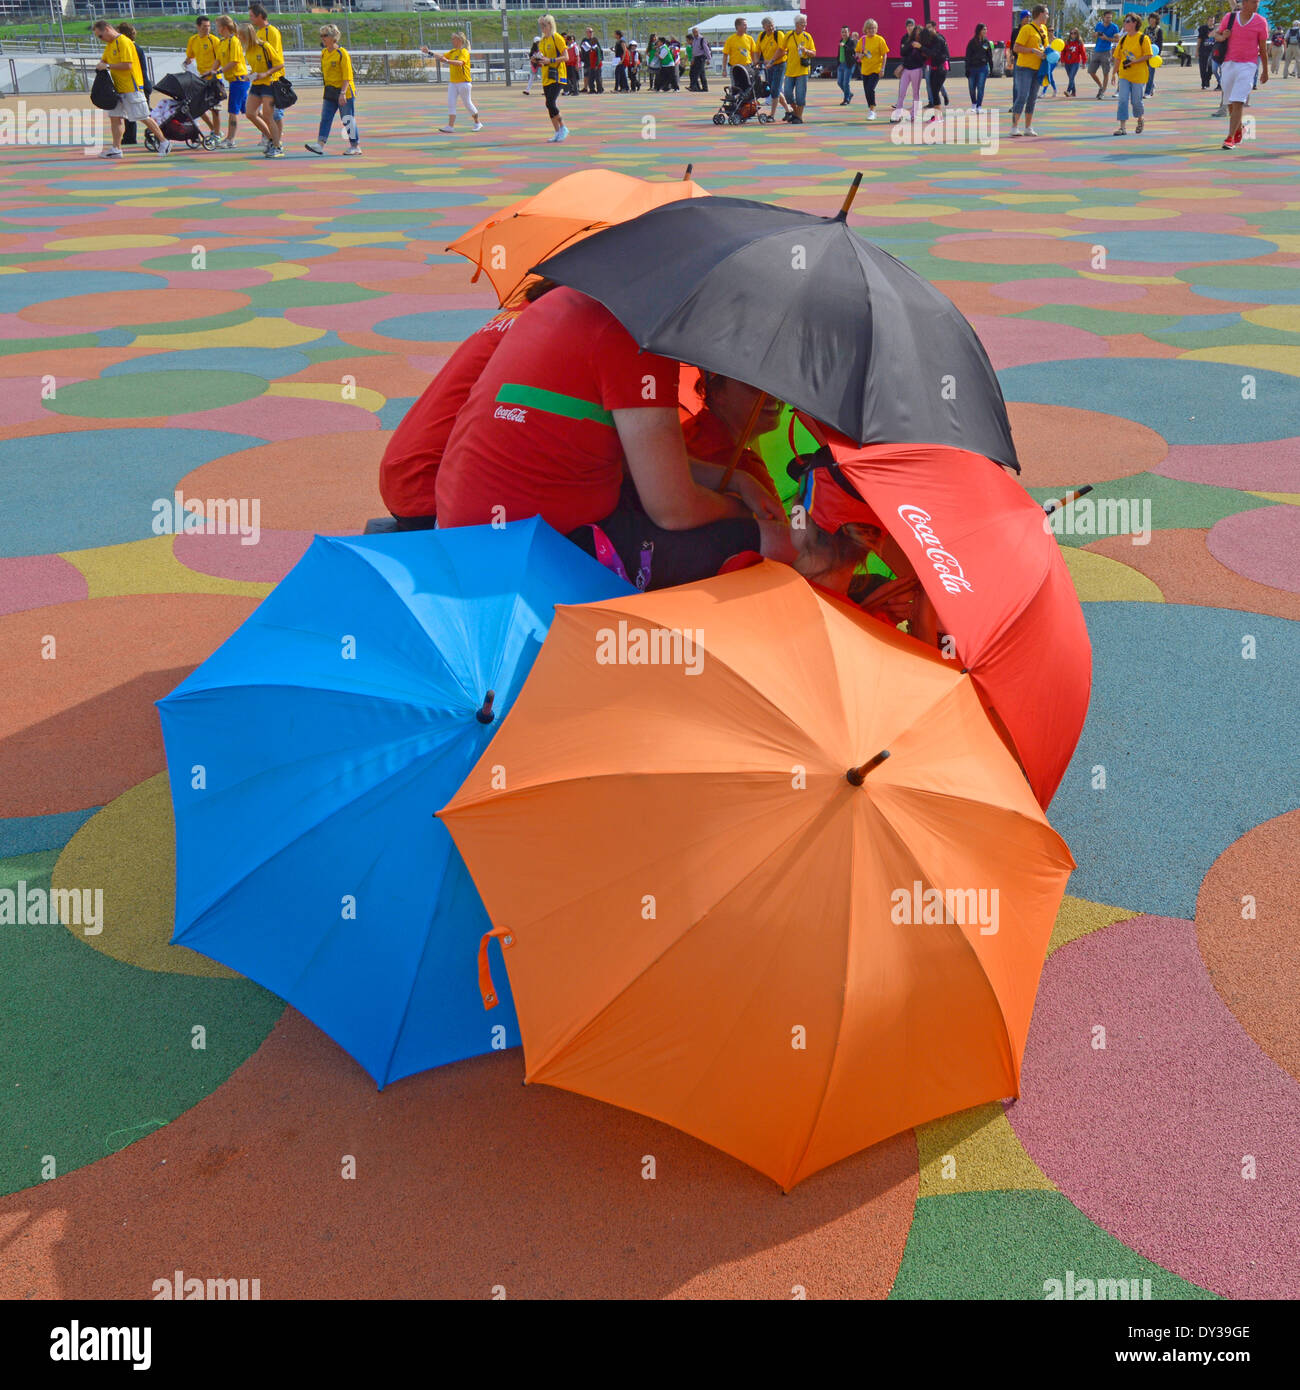 Providing entertainment during the London 2012 games in the Olympic Park popping out from under umbrellas (also Alamy DYJGFC) Stock Photo